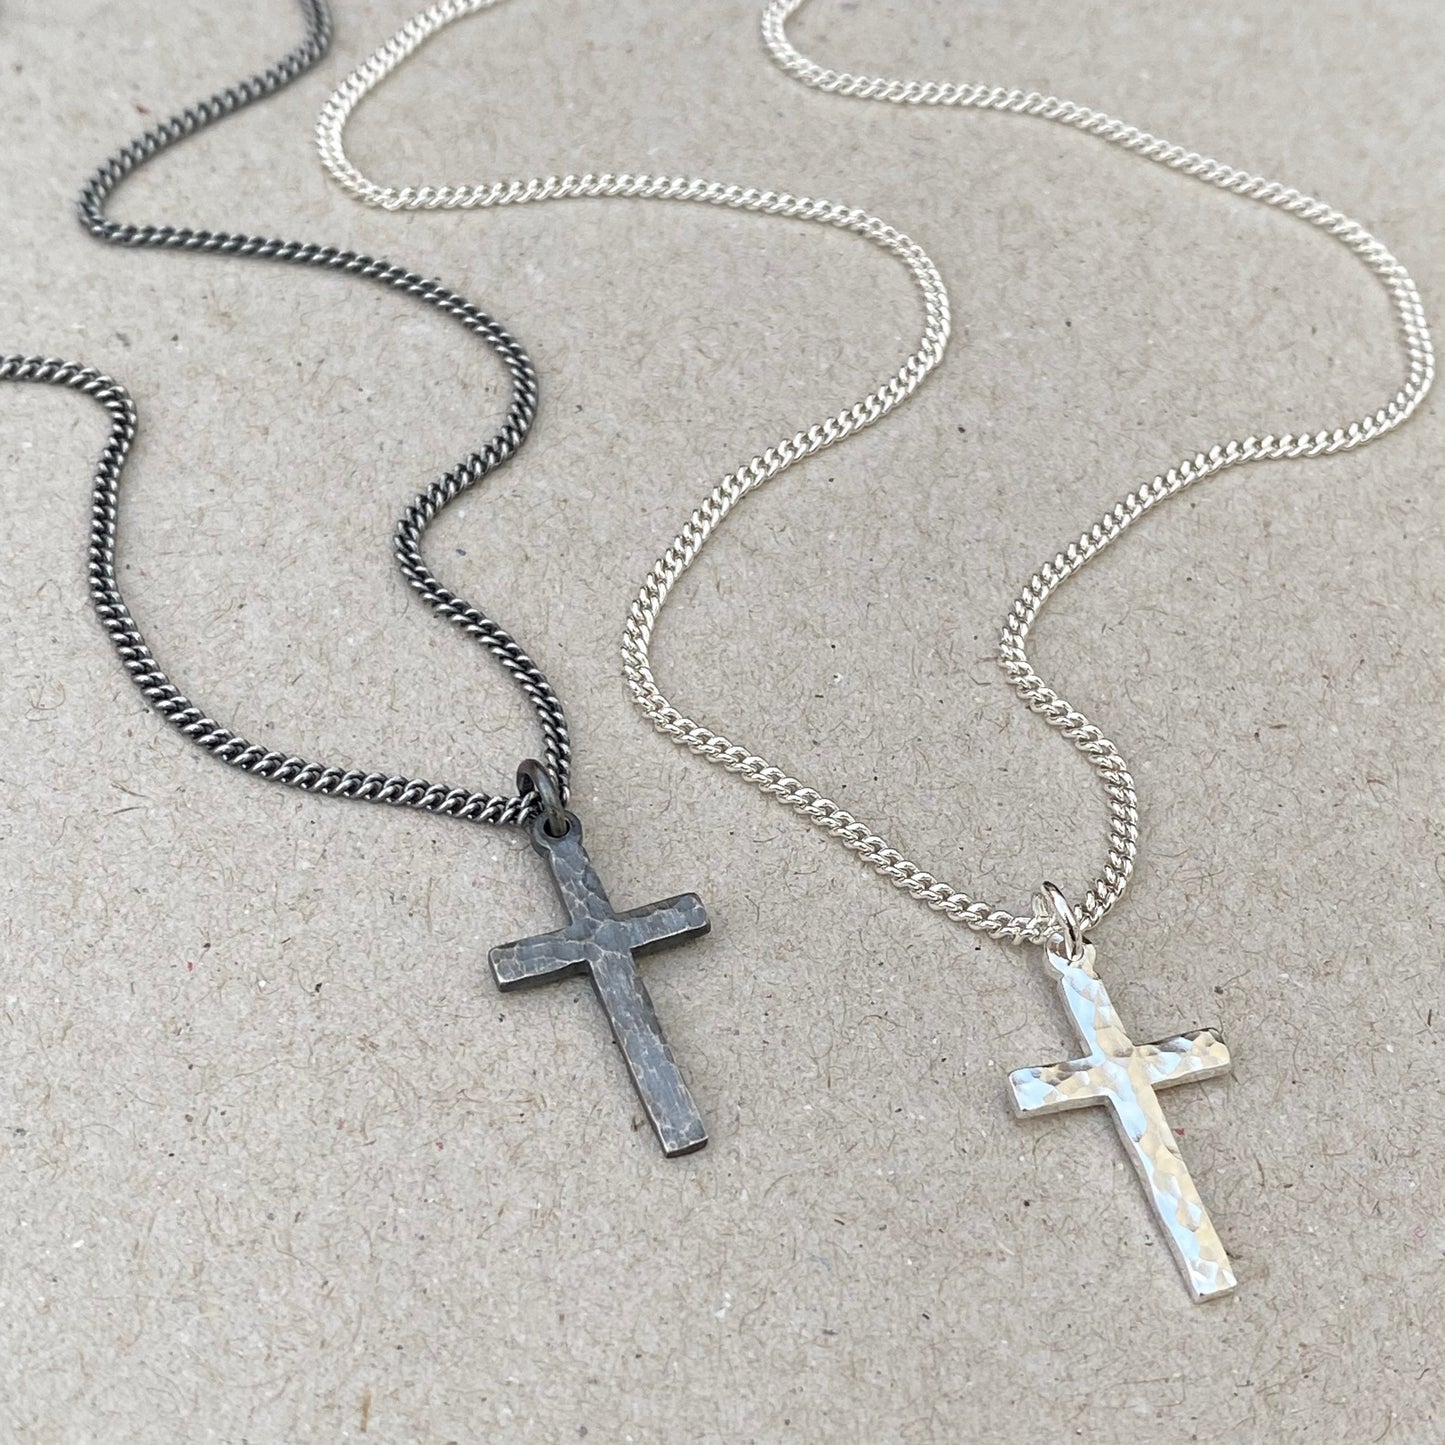 Oxidised or polished small size solid silver hammered cross pendant on a 1.8mm wide tight curb chain